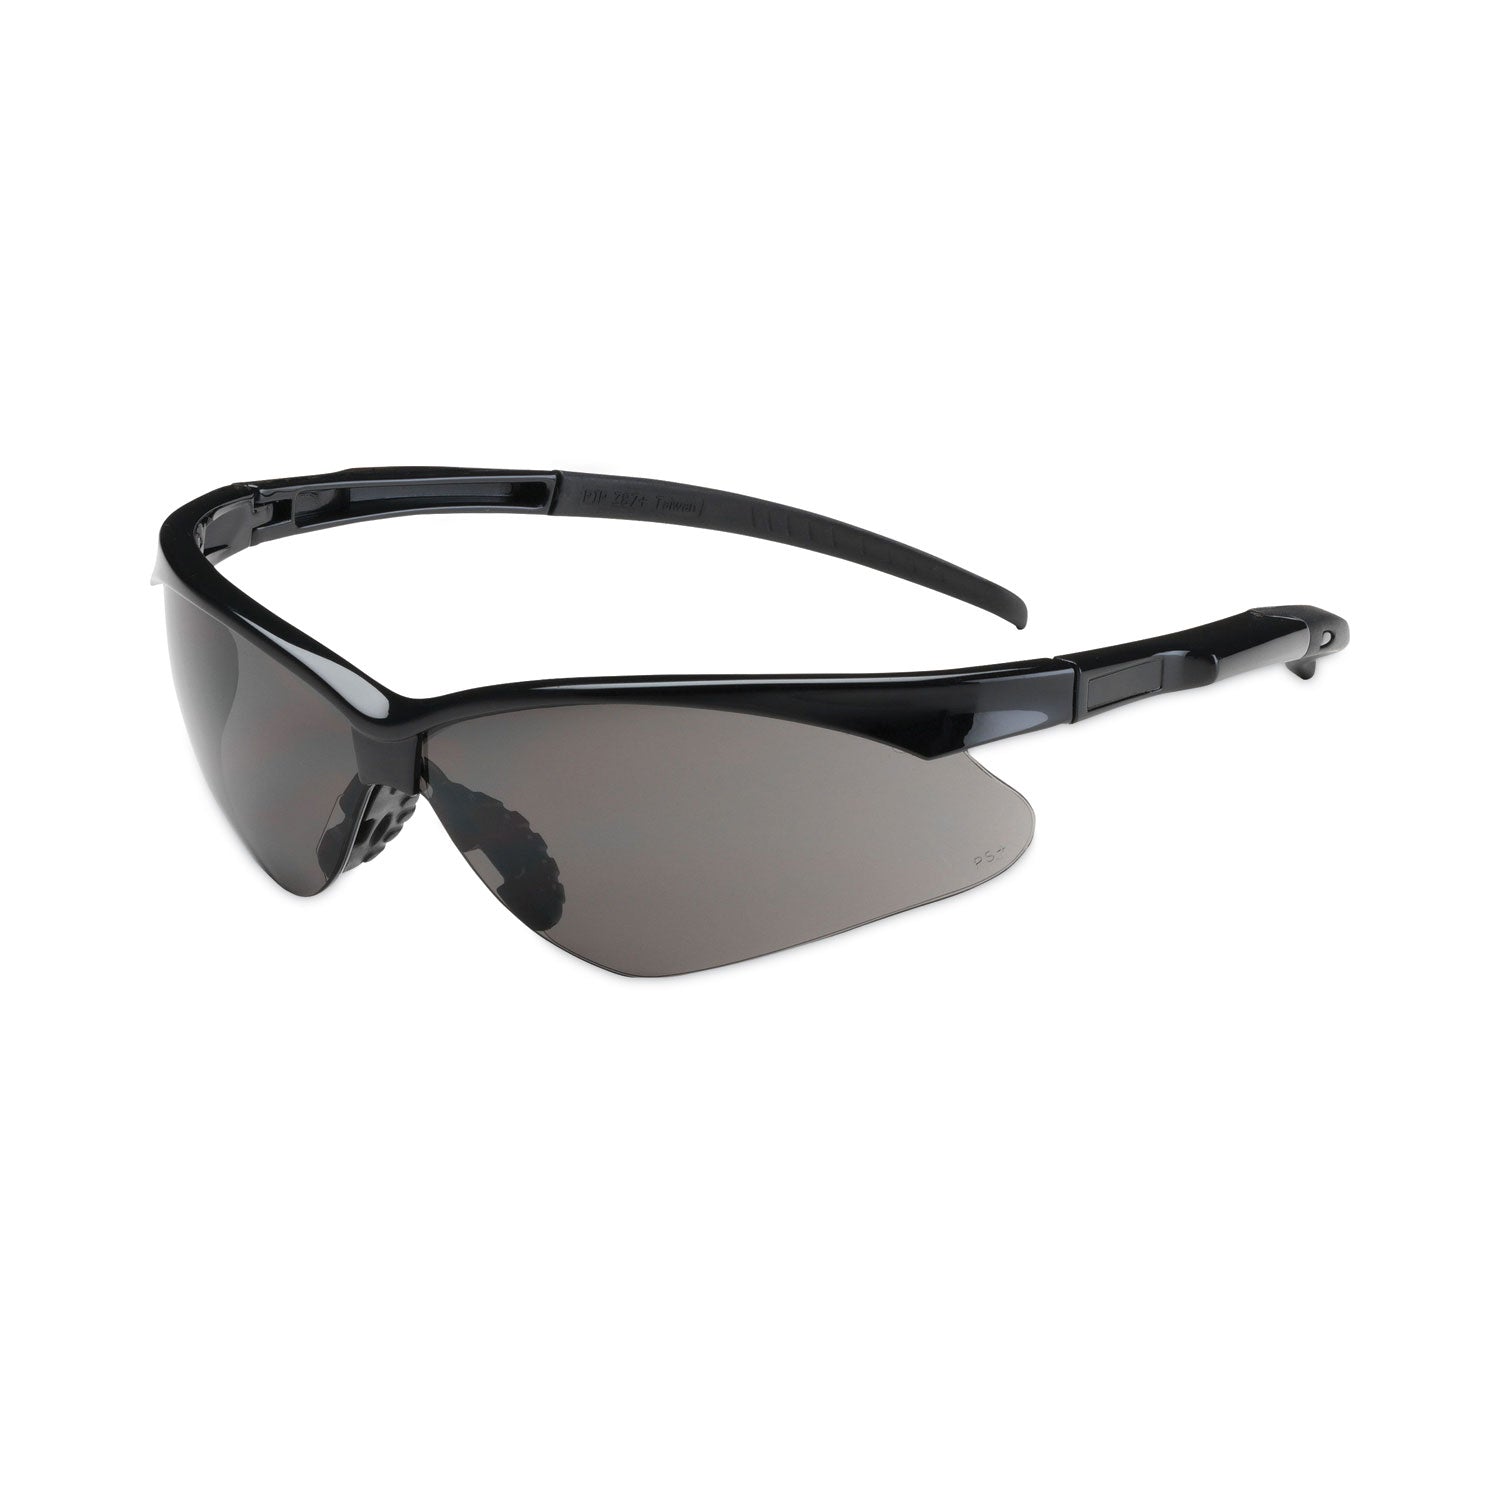 adversary-semi-rimless-safety-glasses-scratch-resistant-black-frame-gray-lens_pid250280001 - 1